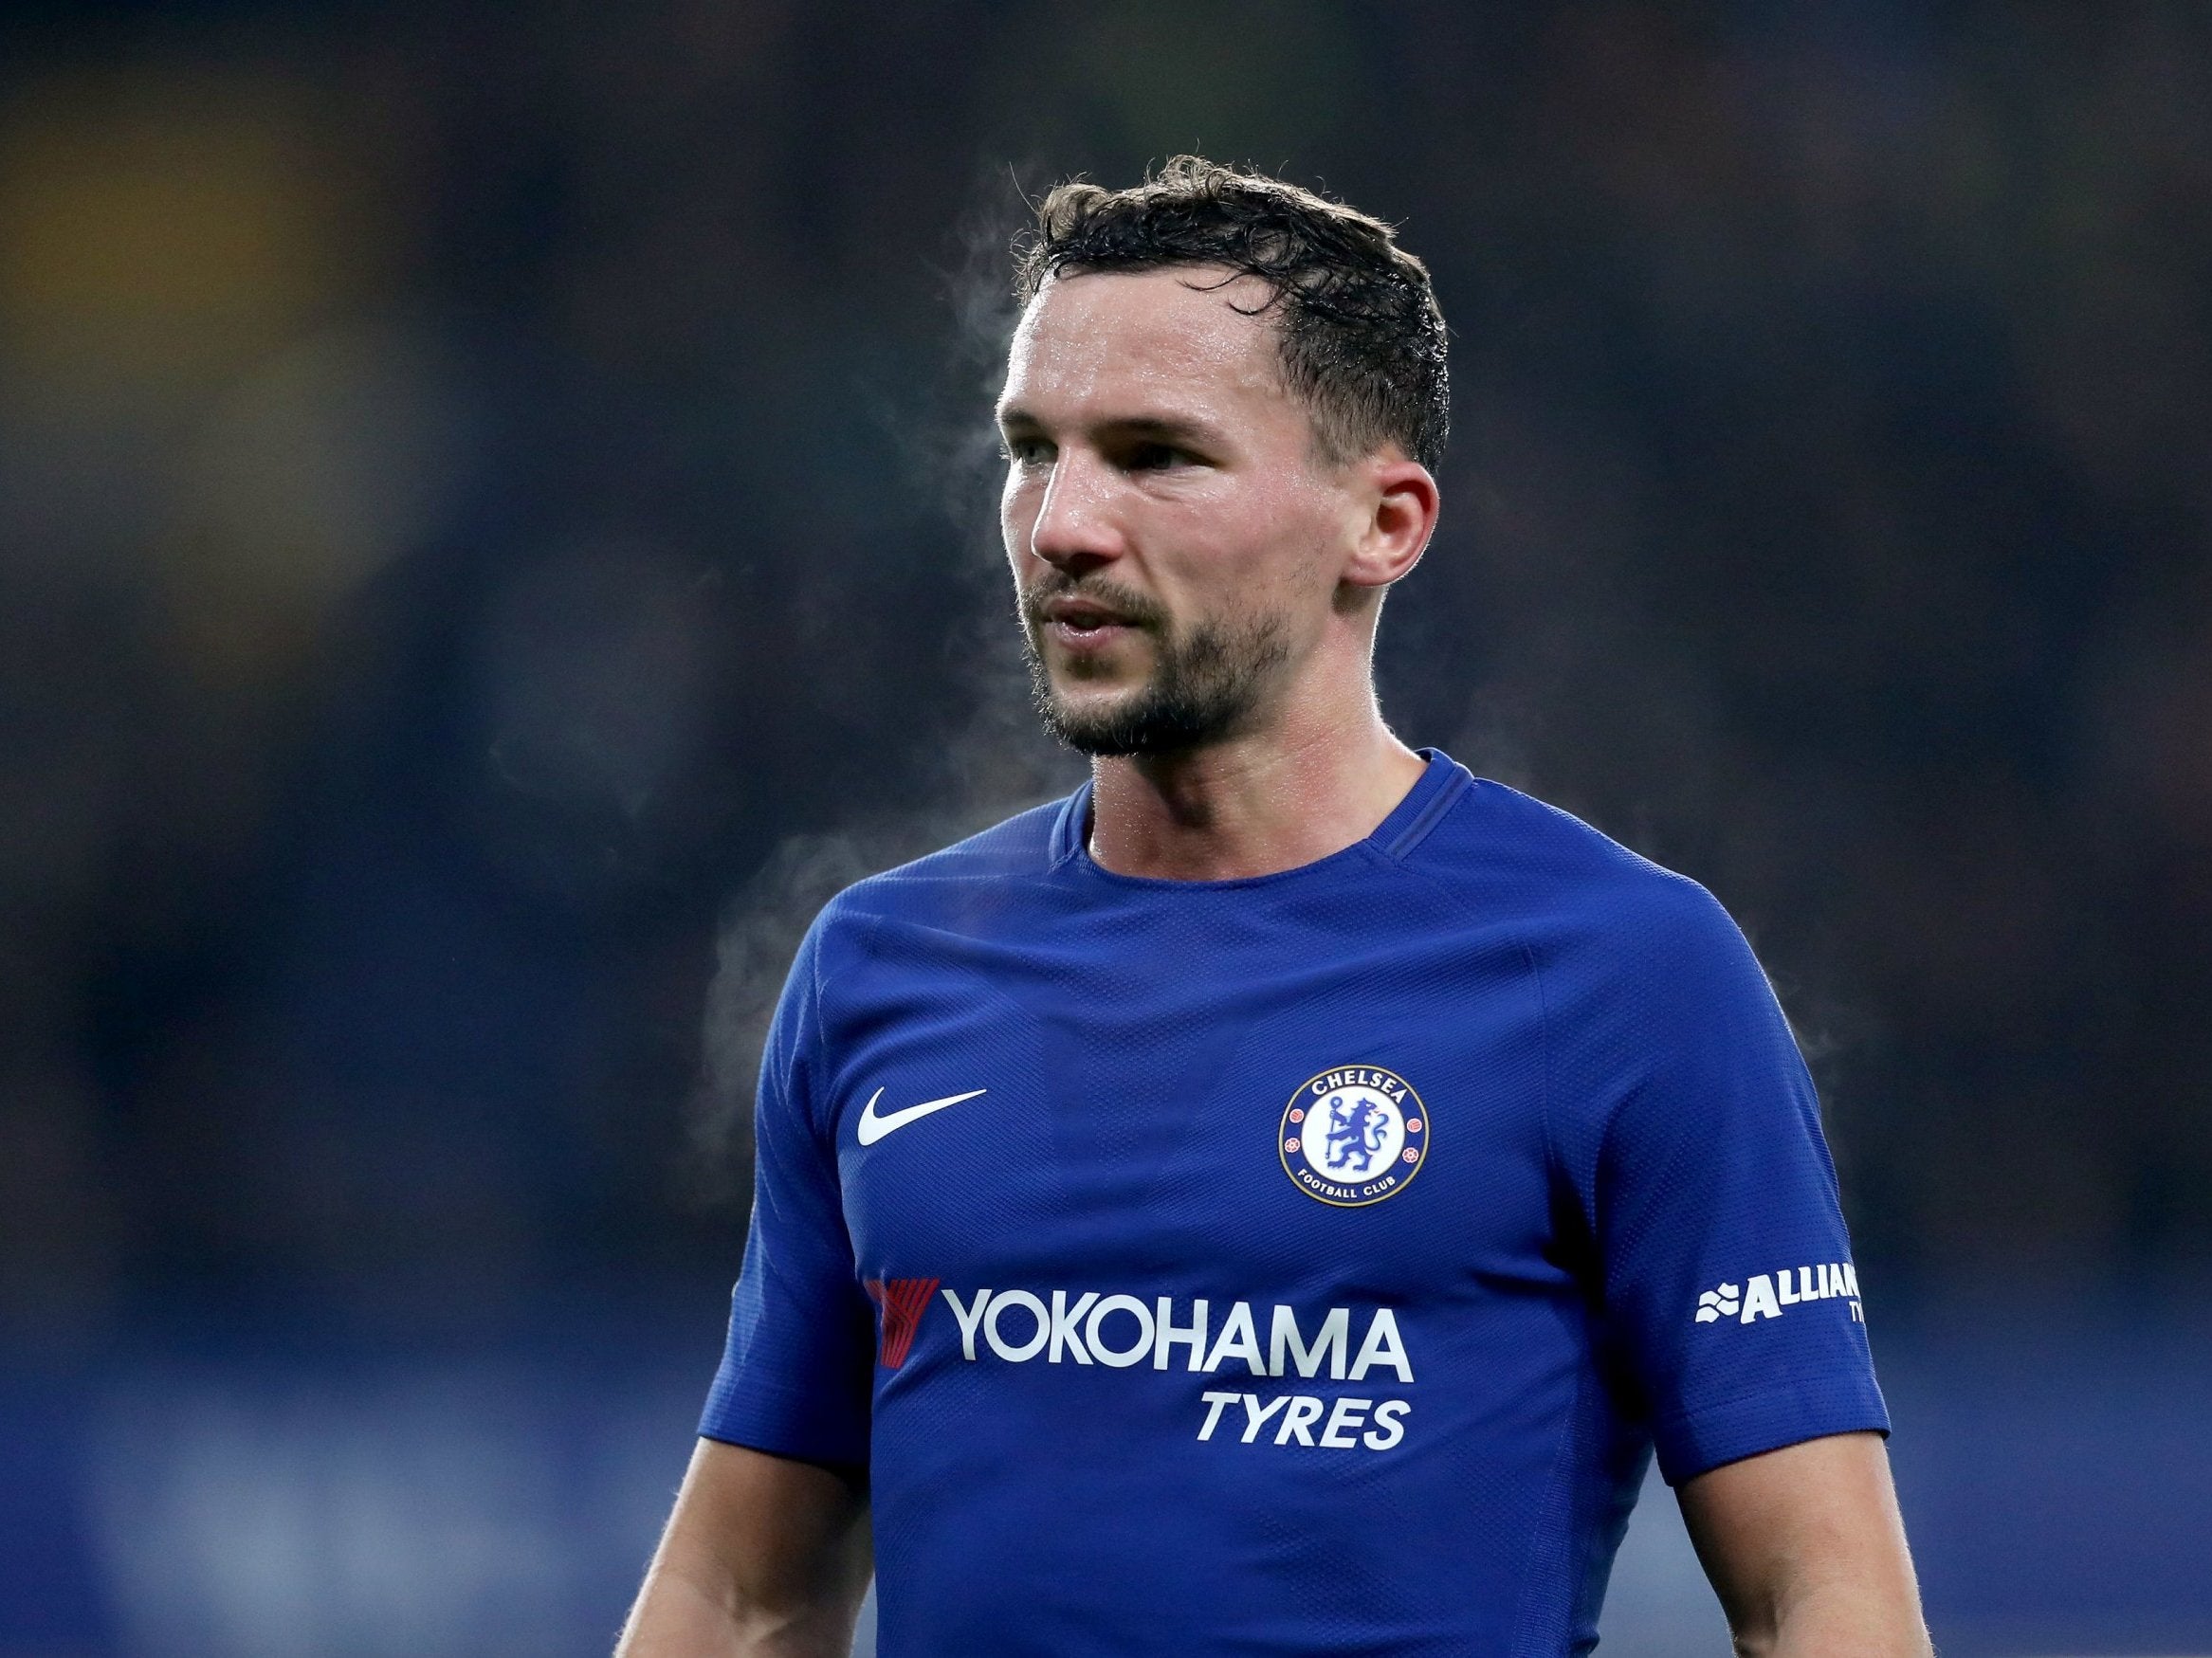 Danny Drinkwater gave a reading of 87 microgrammes of alcohol in 100 millilitres of breath, with the legal limit being 35 microgrammes